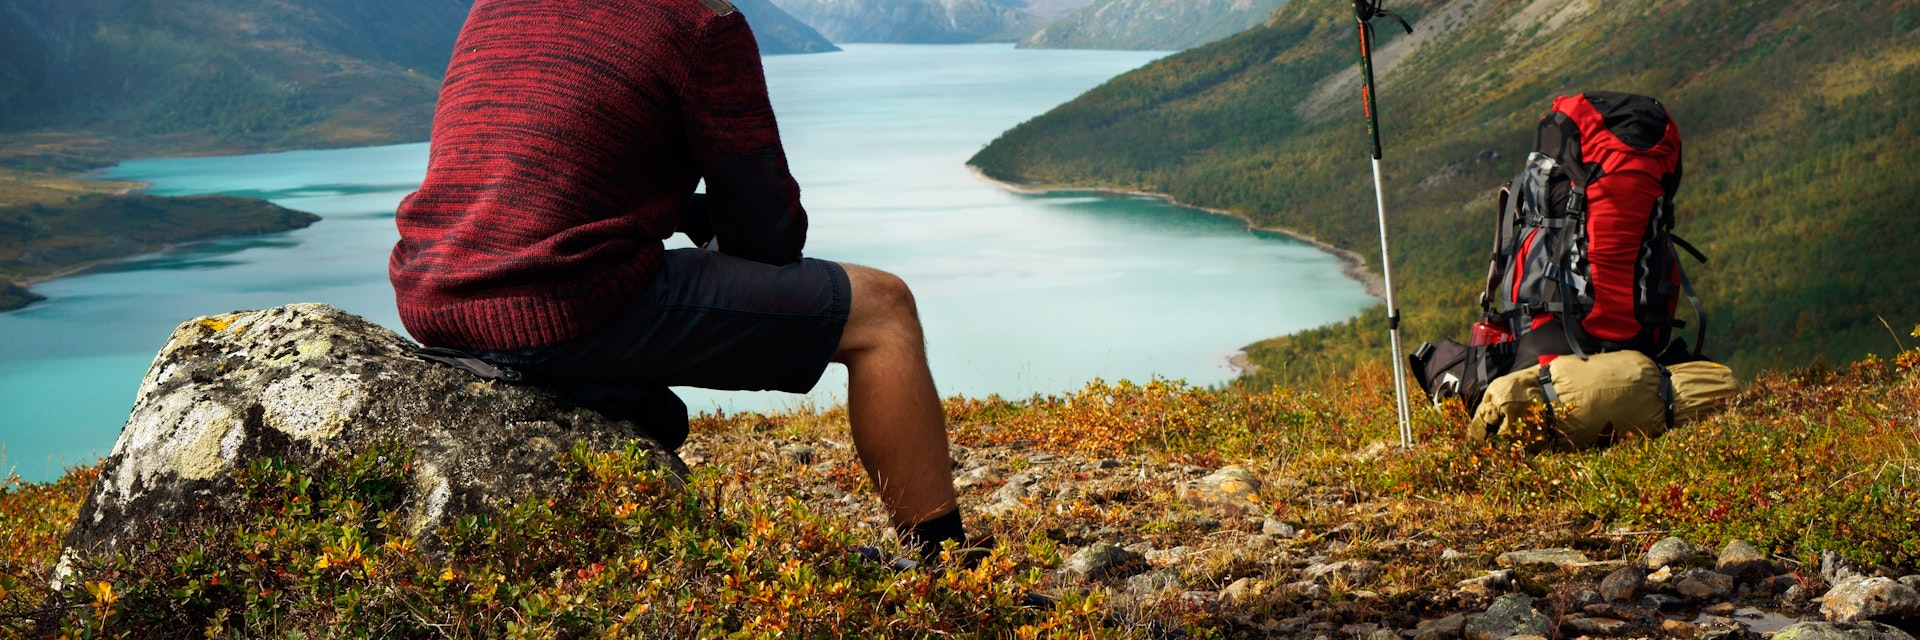 Hiker sitting on a rock in front of Gjendesee Lake in Jotunheimen National Park.